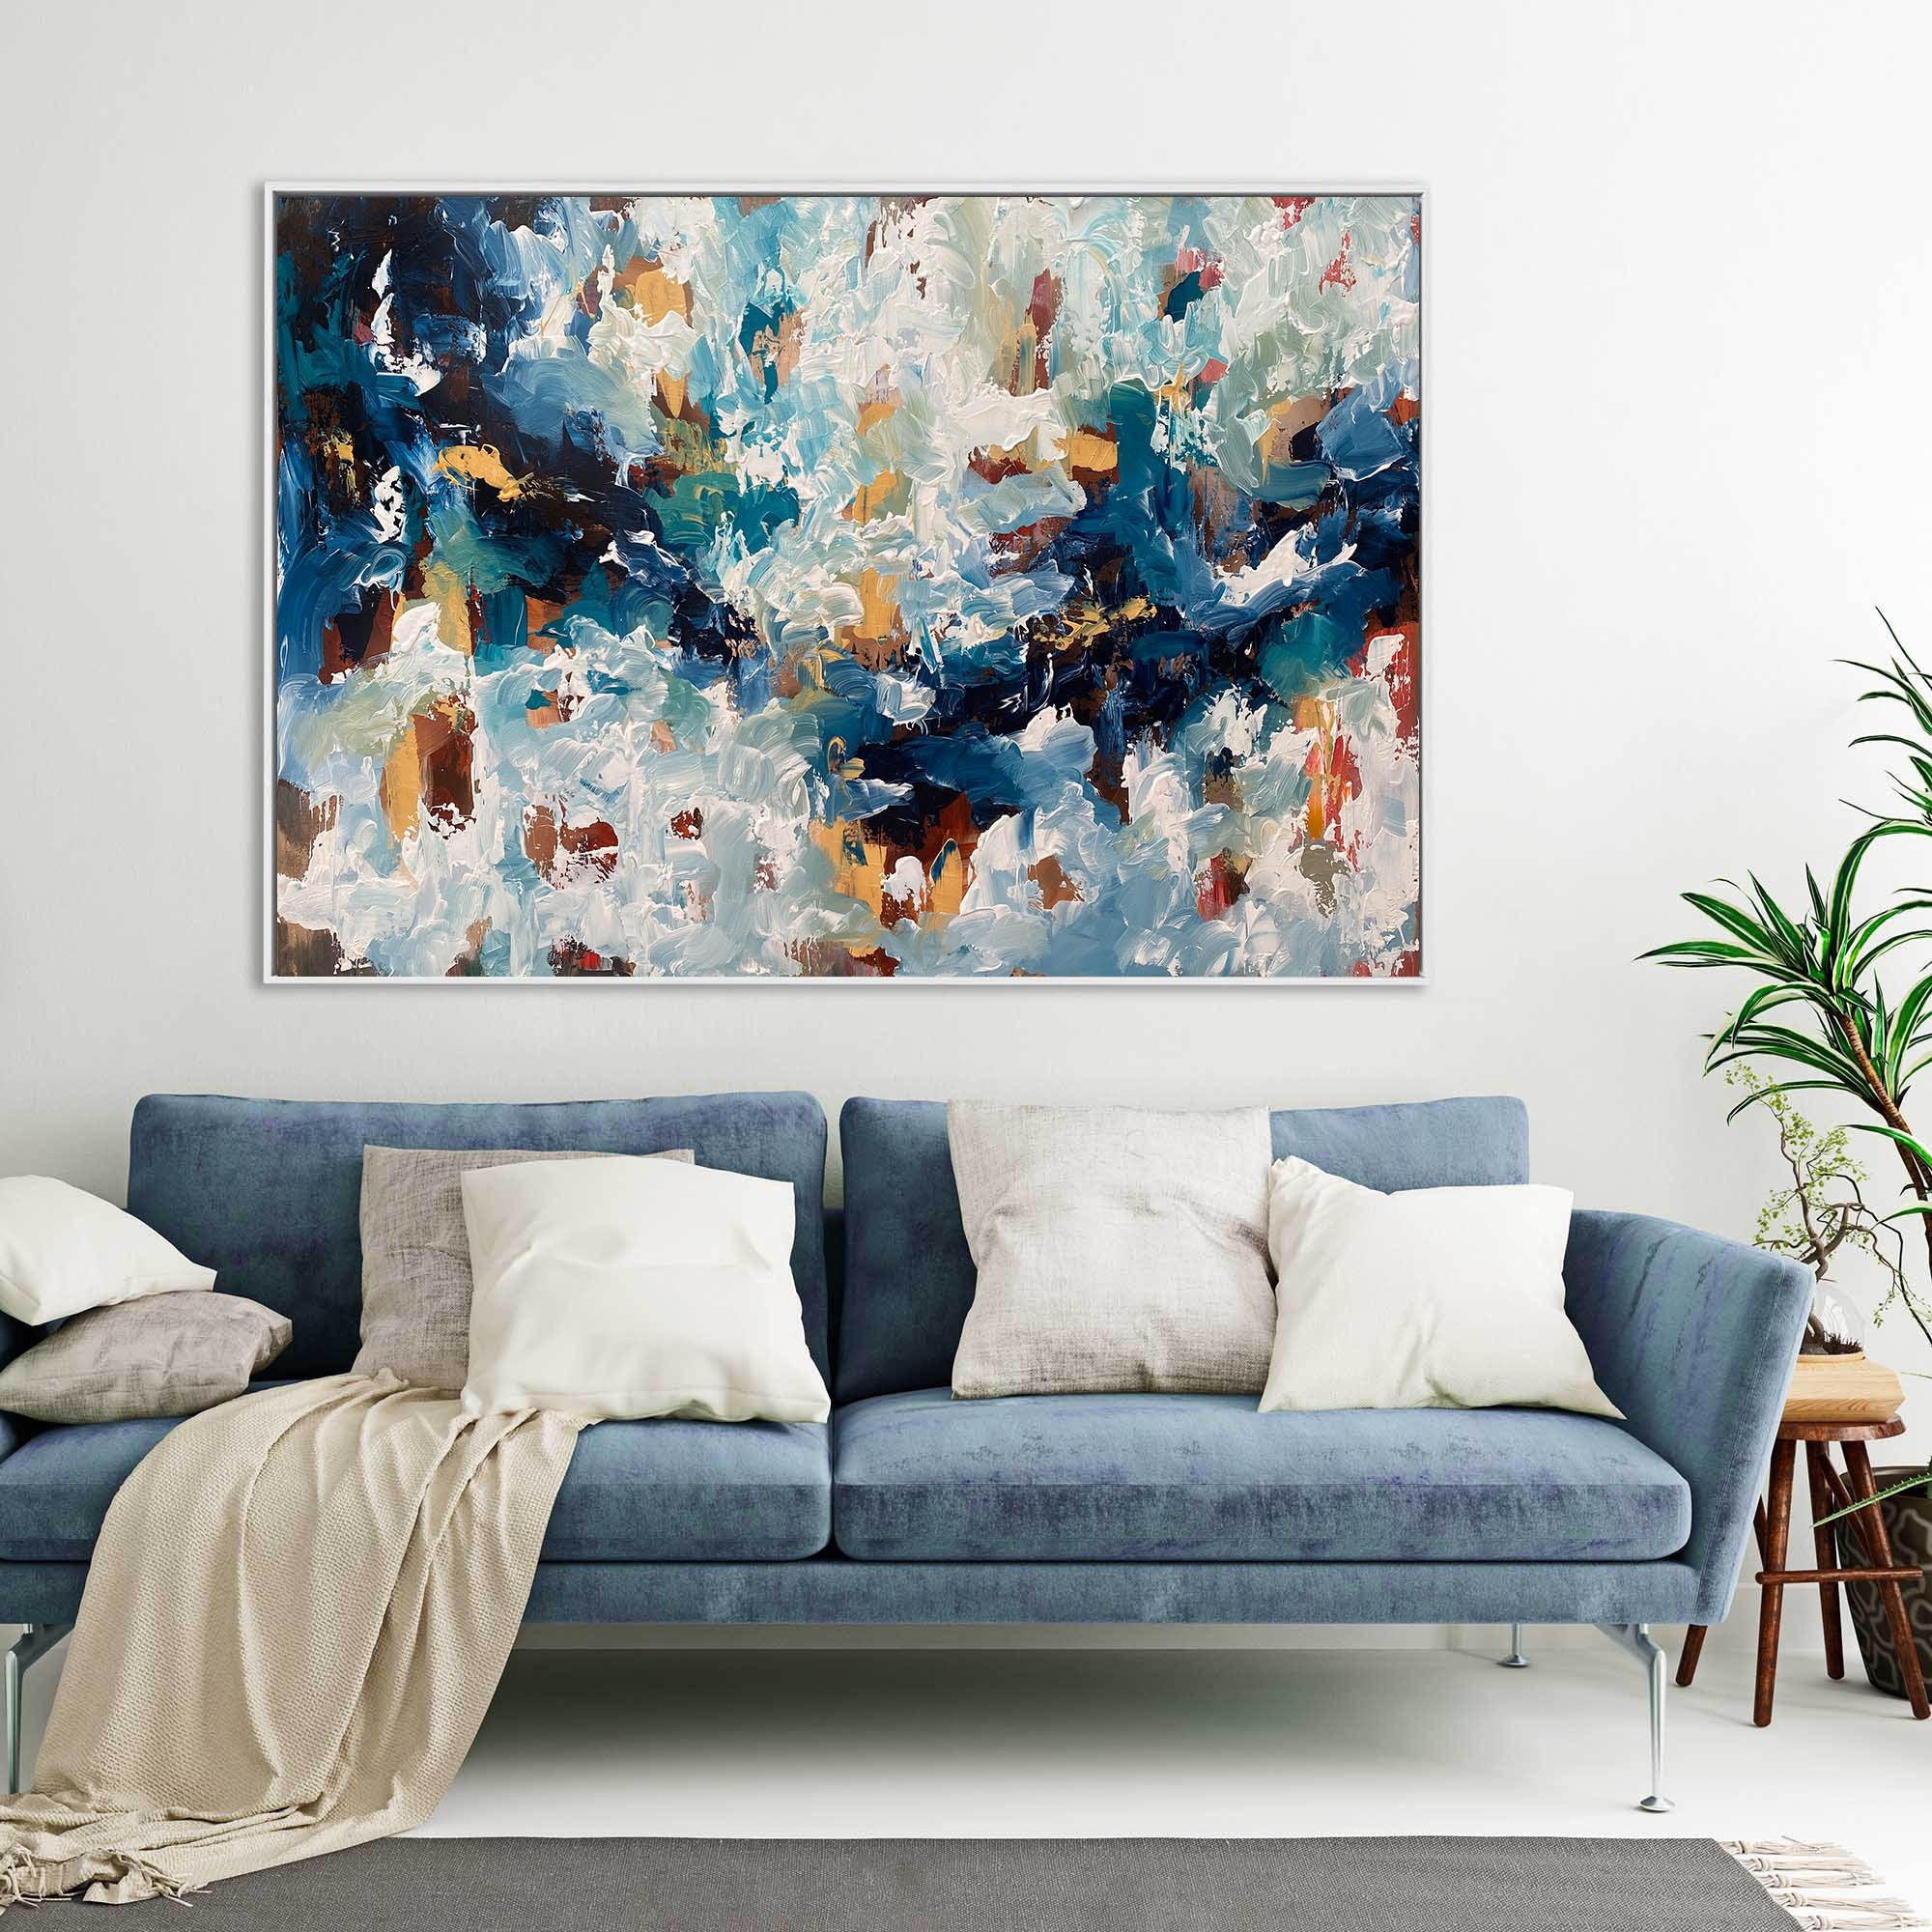 http://abstracthouse.com/cdn/shop/collections/Large_Abstract_Painting_Above_Sofa_In_Living_Room_copy_3a69eb0b-be42-4d7b-aa3e-13c33492d0cd.jpg?v=1654609365&width=2048